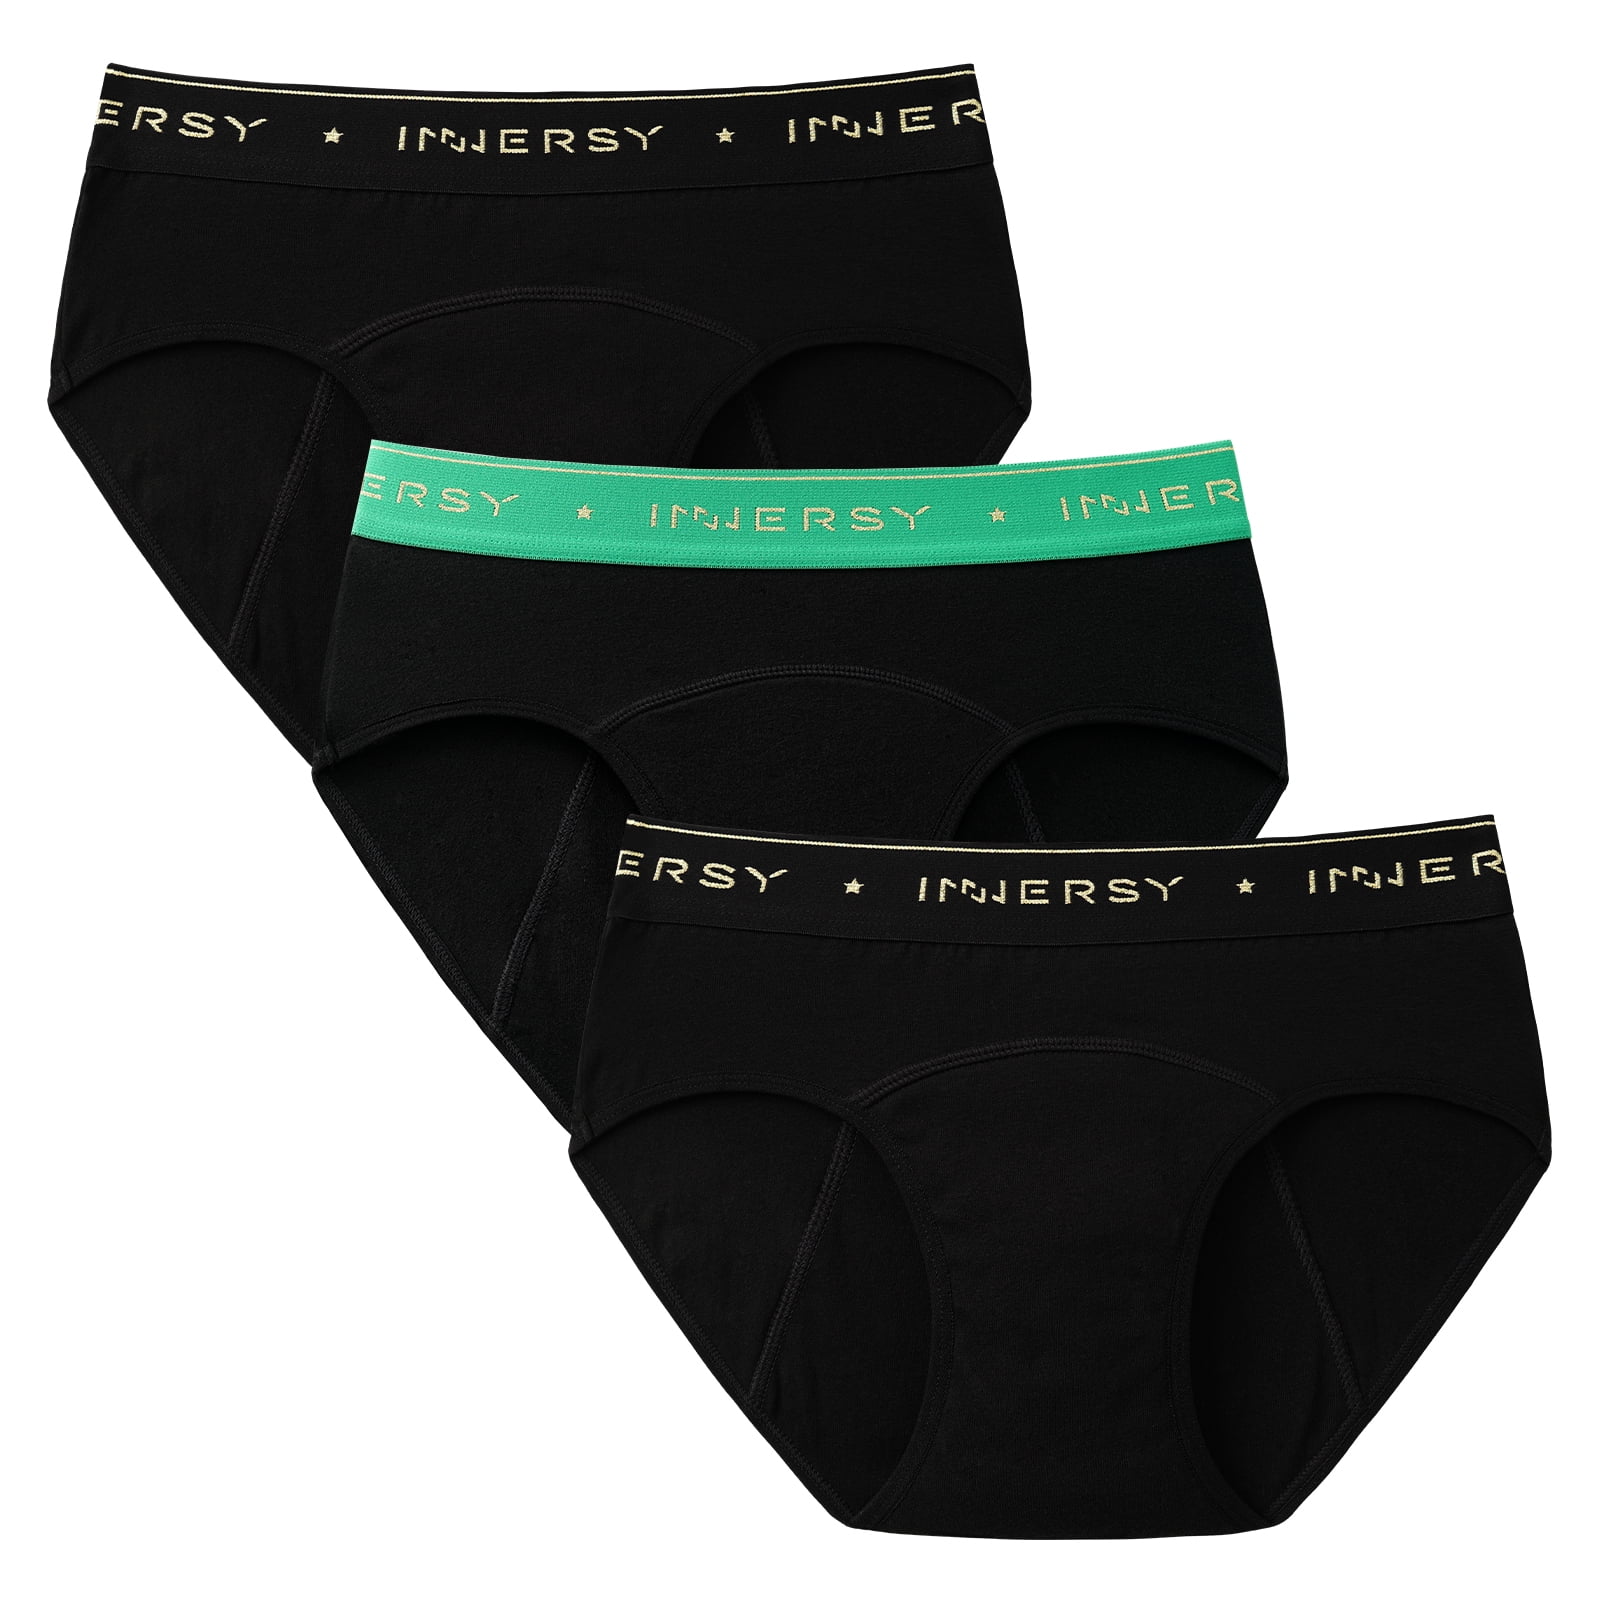 INNERSY Period Underwear for Teen Girls Cotton Leakproof Menstrual Panties  3 Pack (S(8-10 yrs), Black with White Piping) 